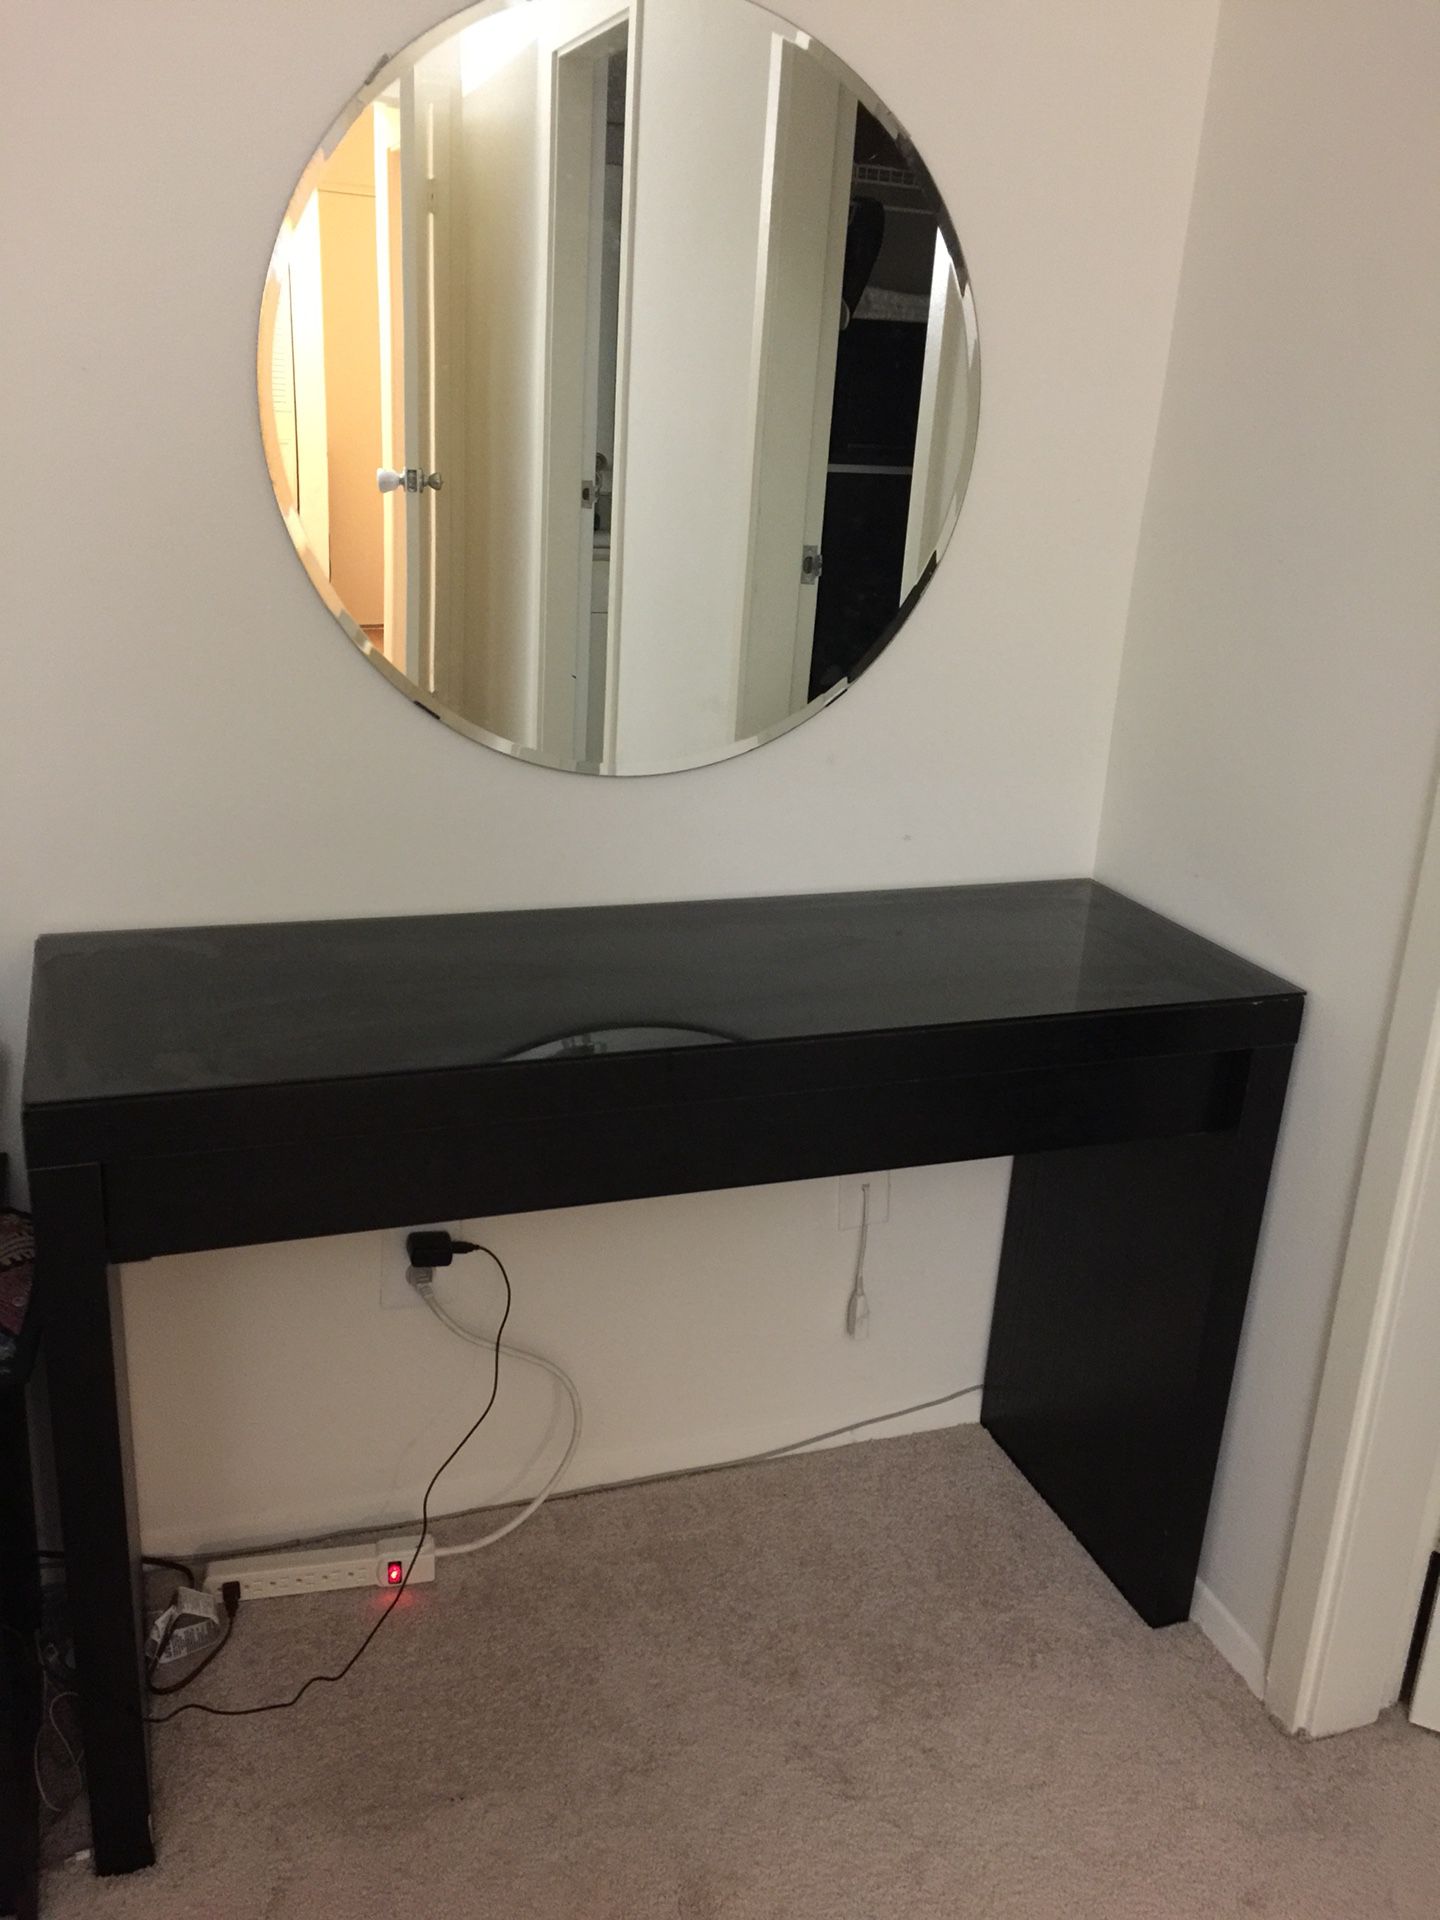 Dressing table with glass on top and mirror